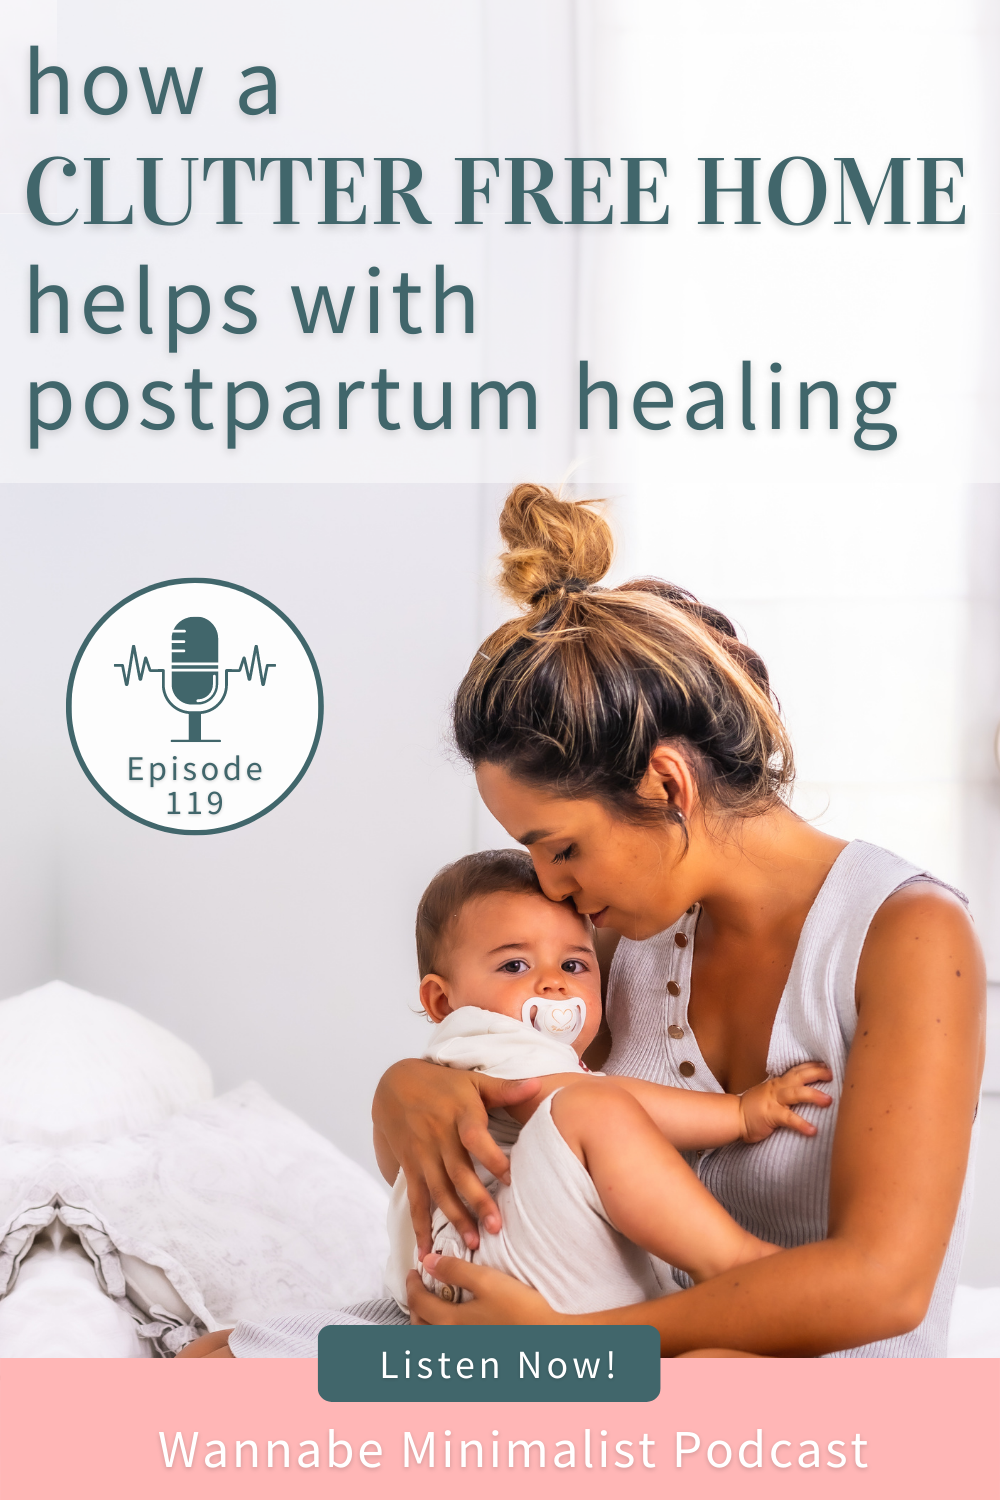 How a Clutter Free Home Helps with Postpartum Healing